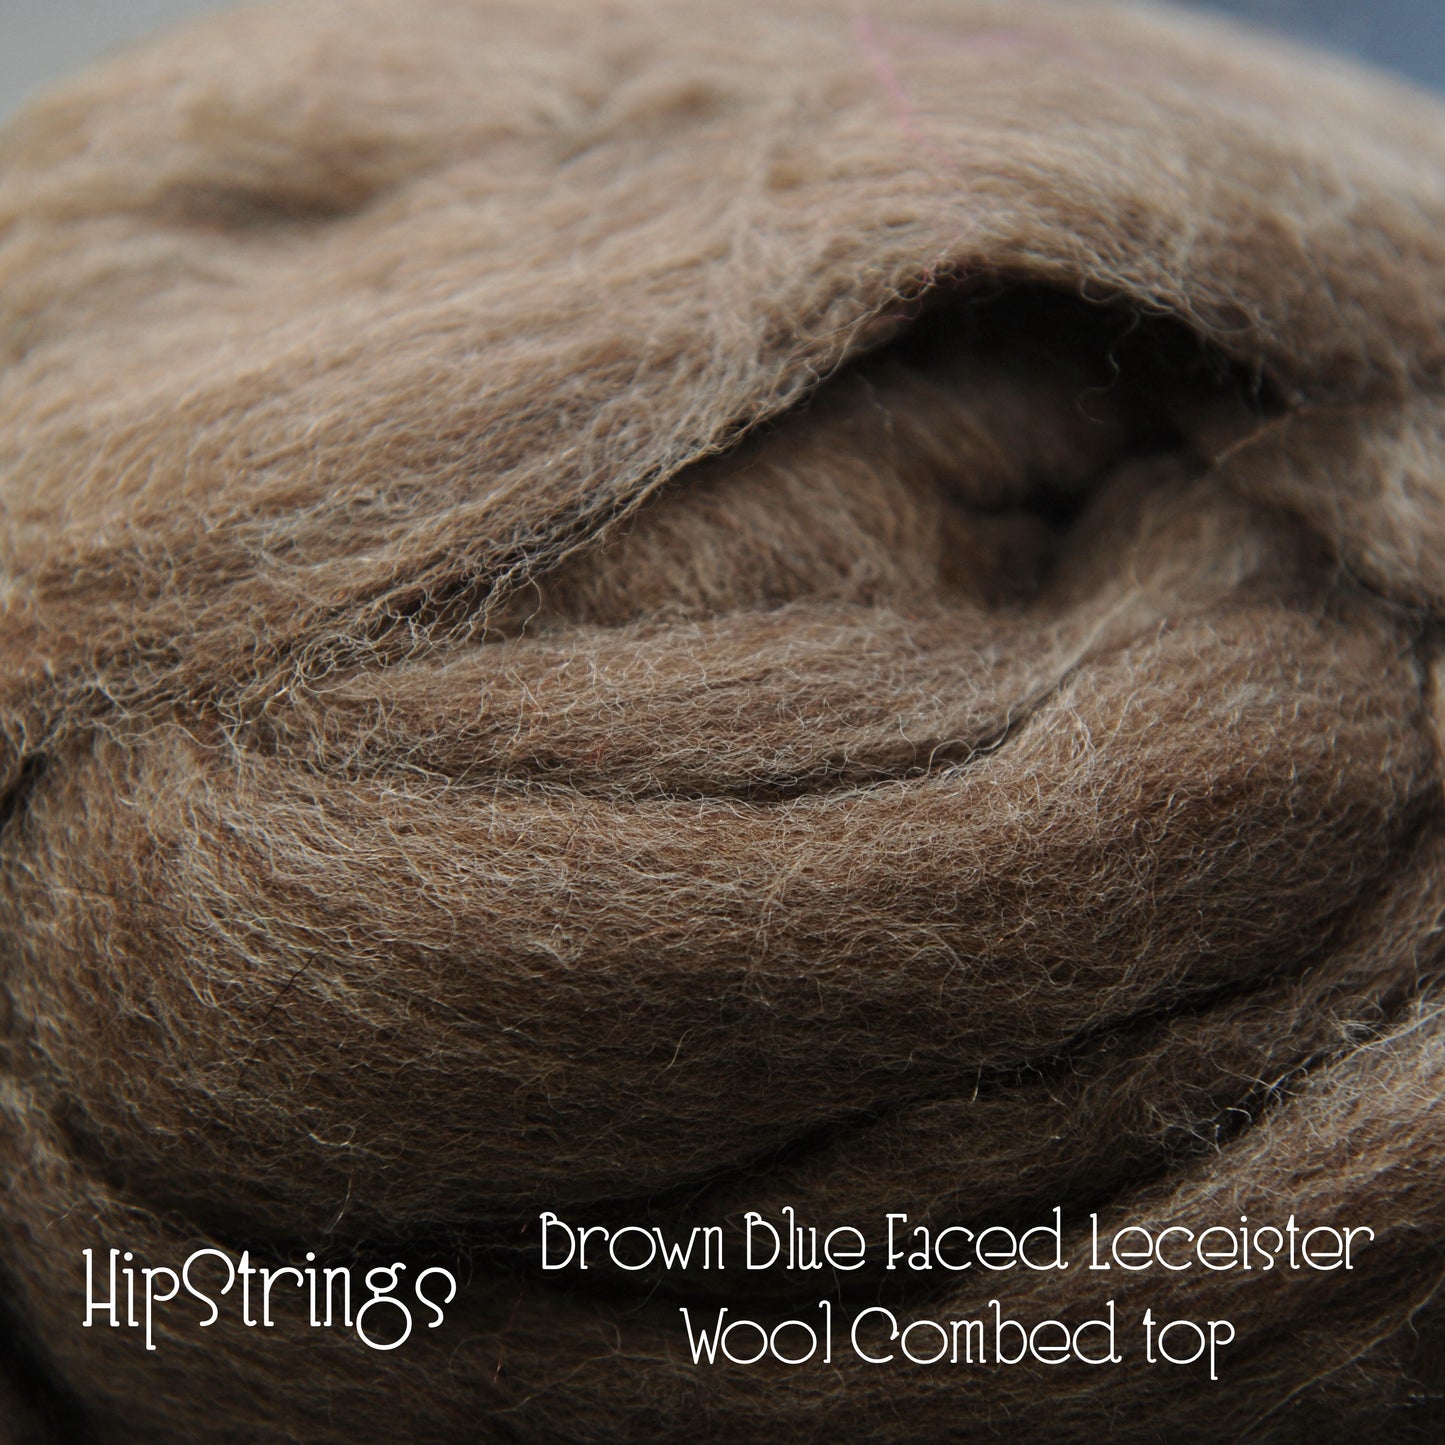 Natural Shades of Blue Faced Leicester Combed Wool Top 4 oz